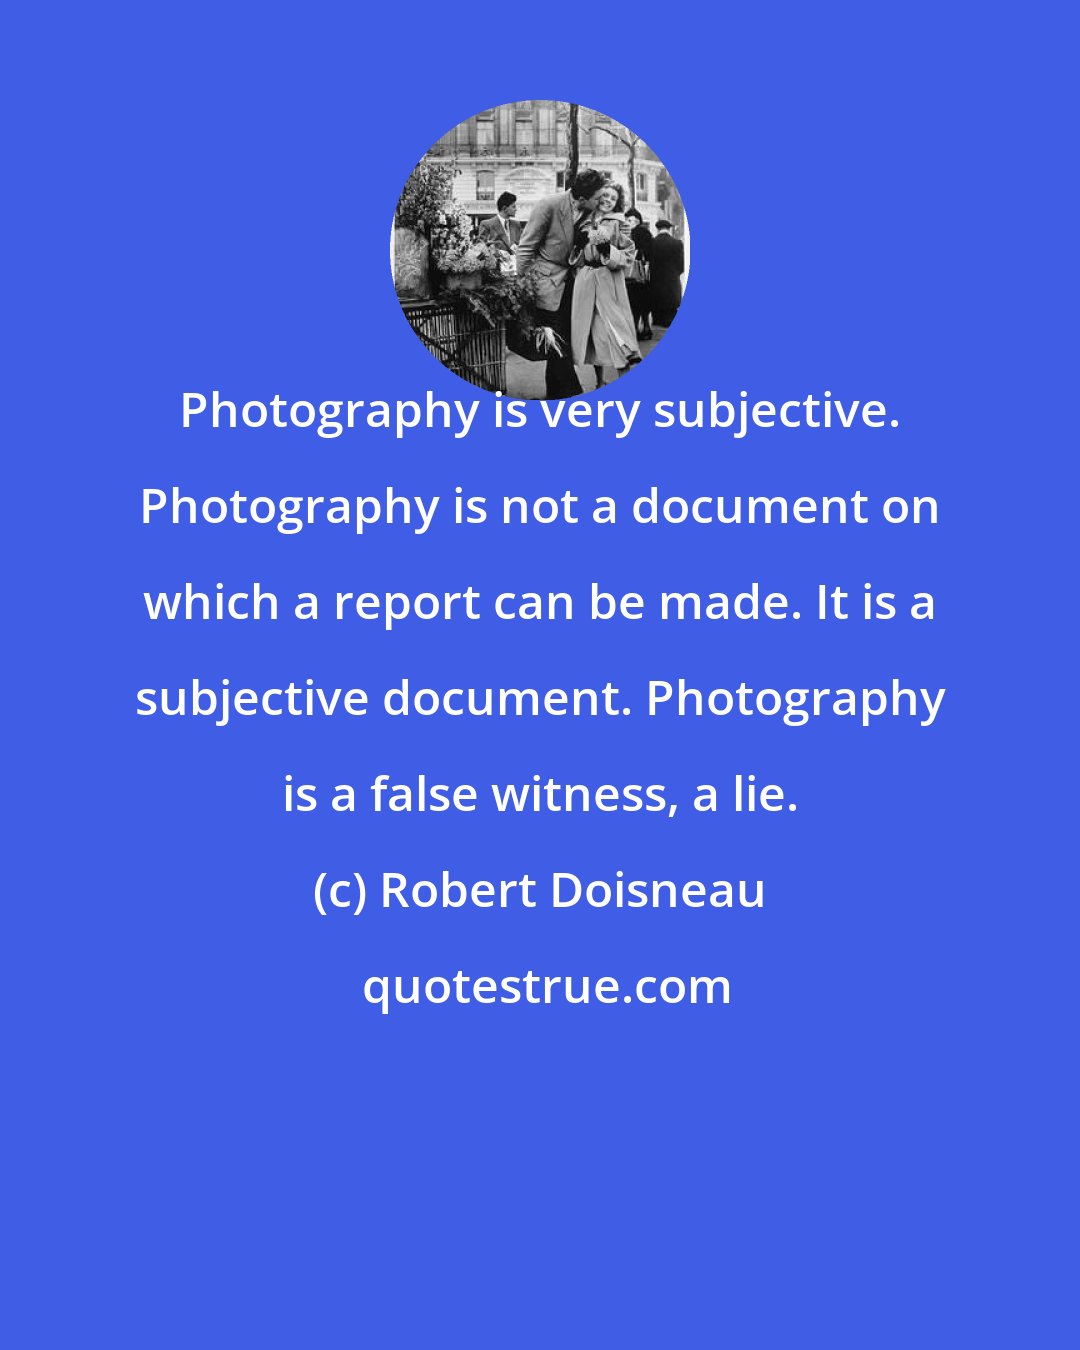 Robert Doisneau: Photography is very subjective. Photography is not a document on which a report can be made. It is a subjective document. Photography is a false witness, a lie.